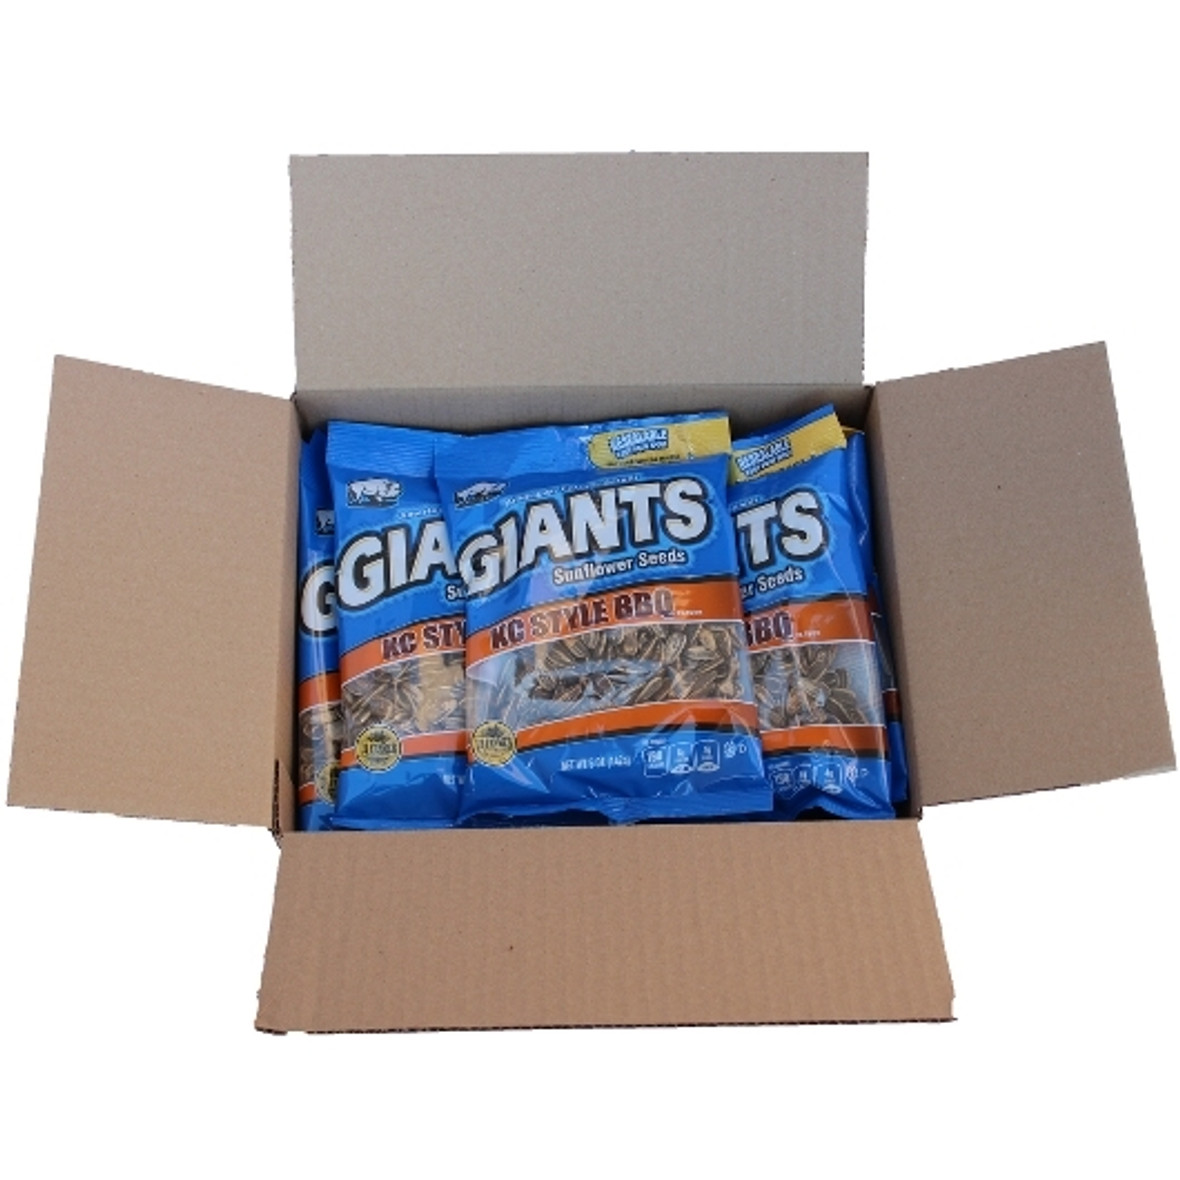 Giants Barbecue Seeds, 5 Ounces, 12 Per Case